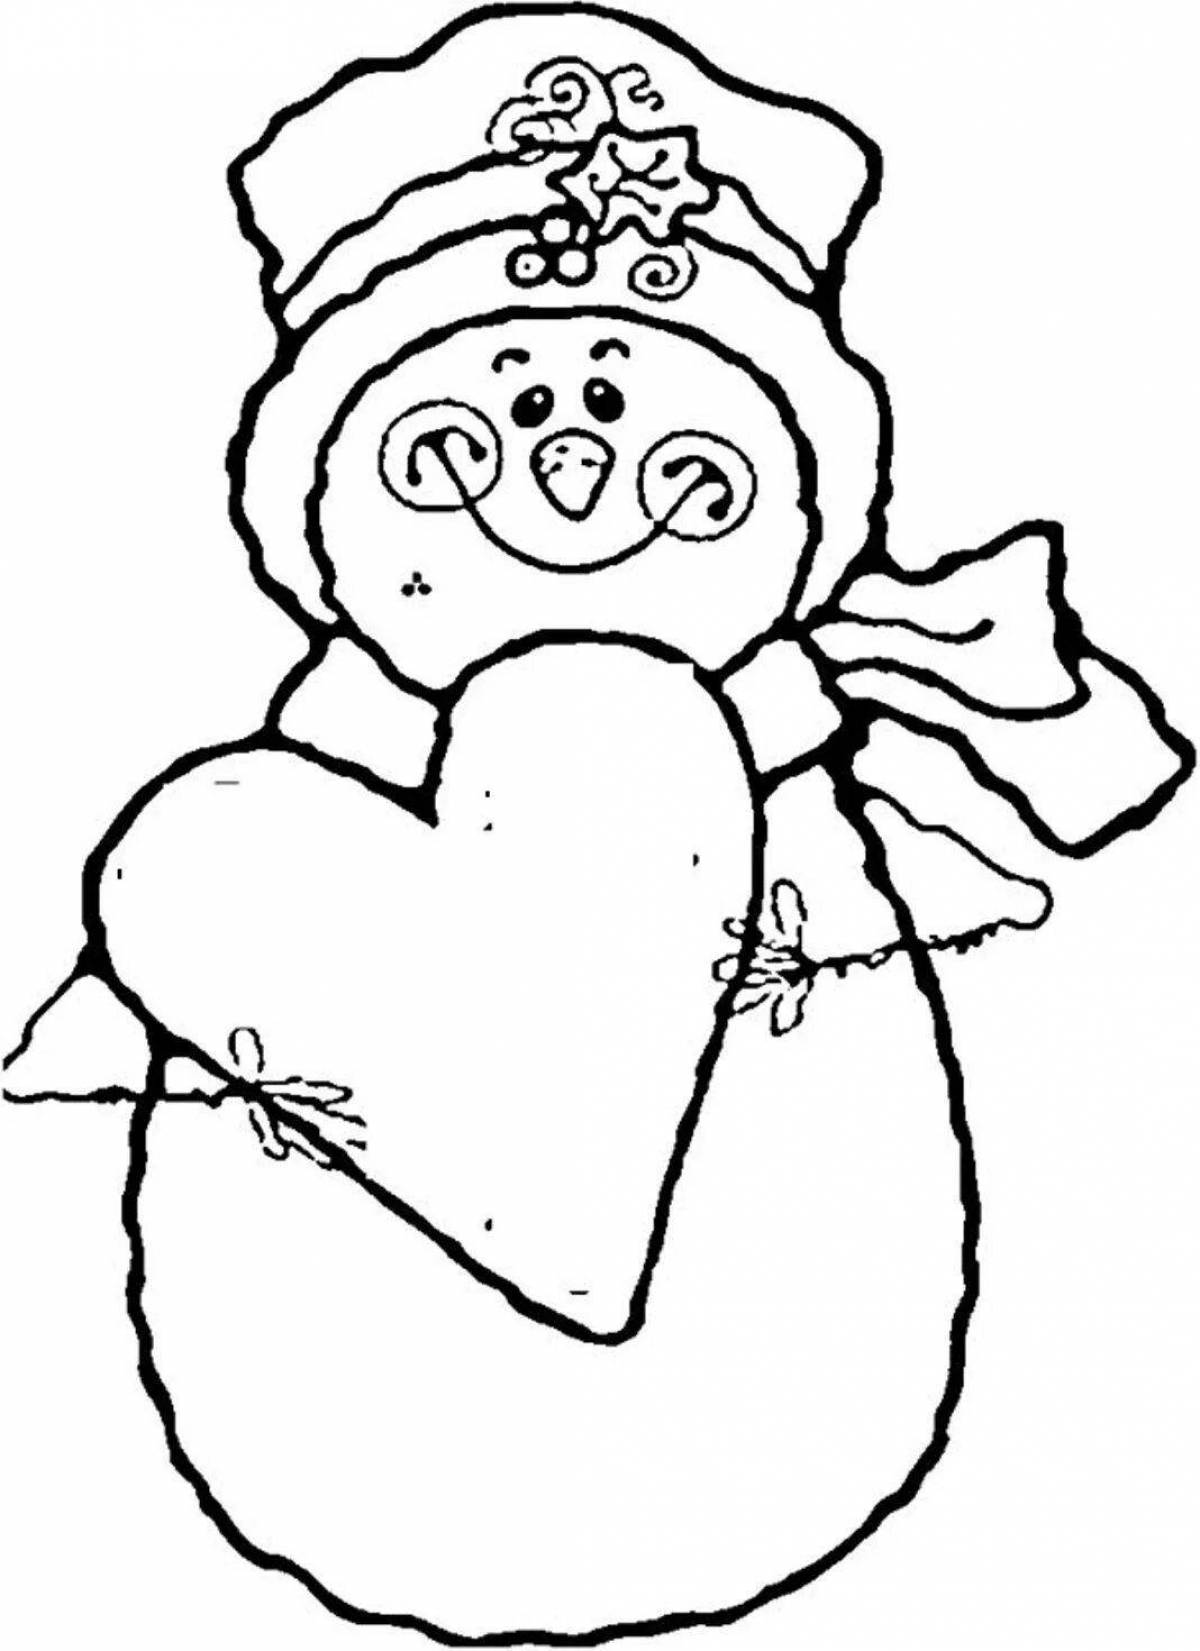 Mom's happy new year coloring book